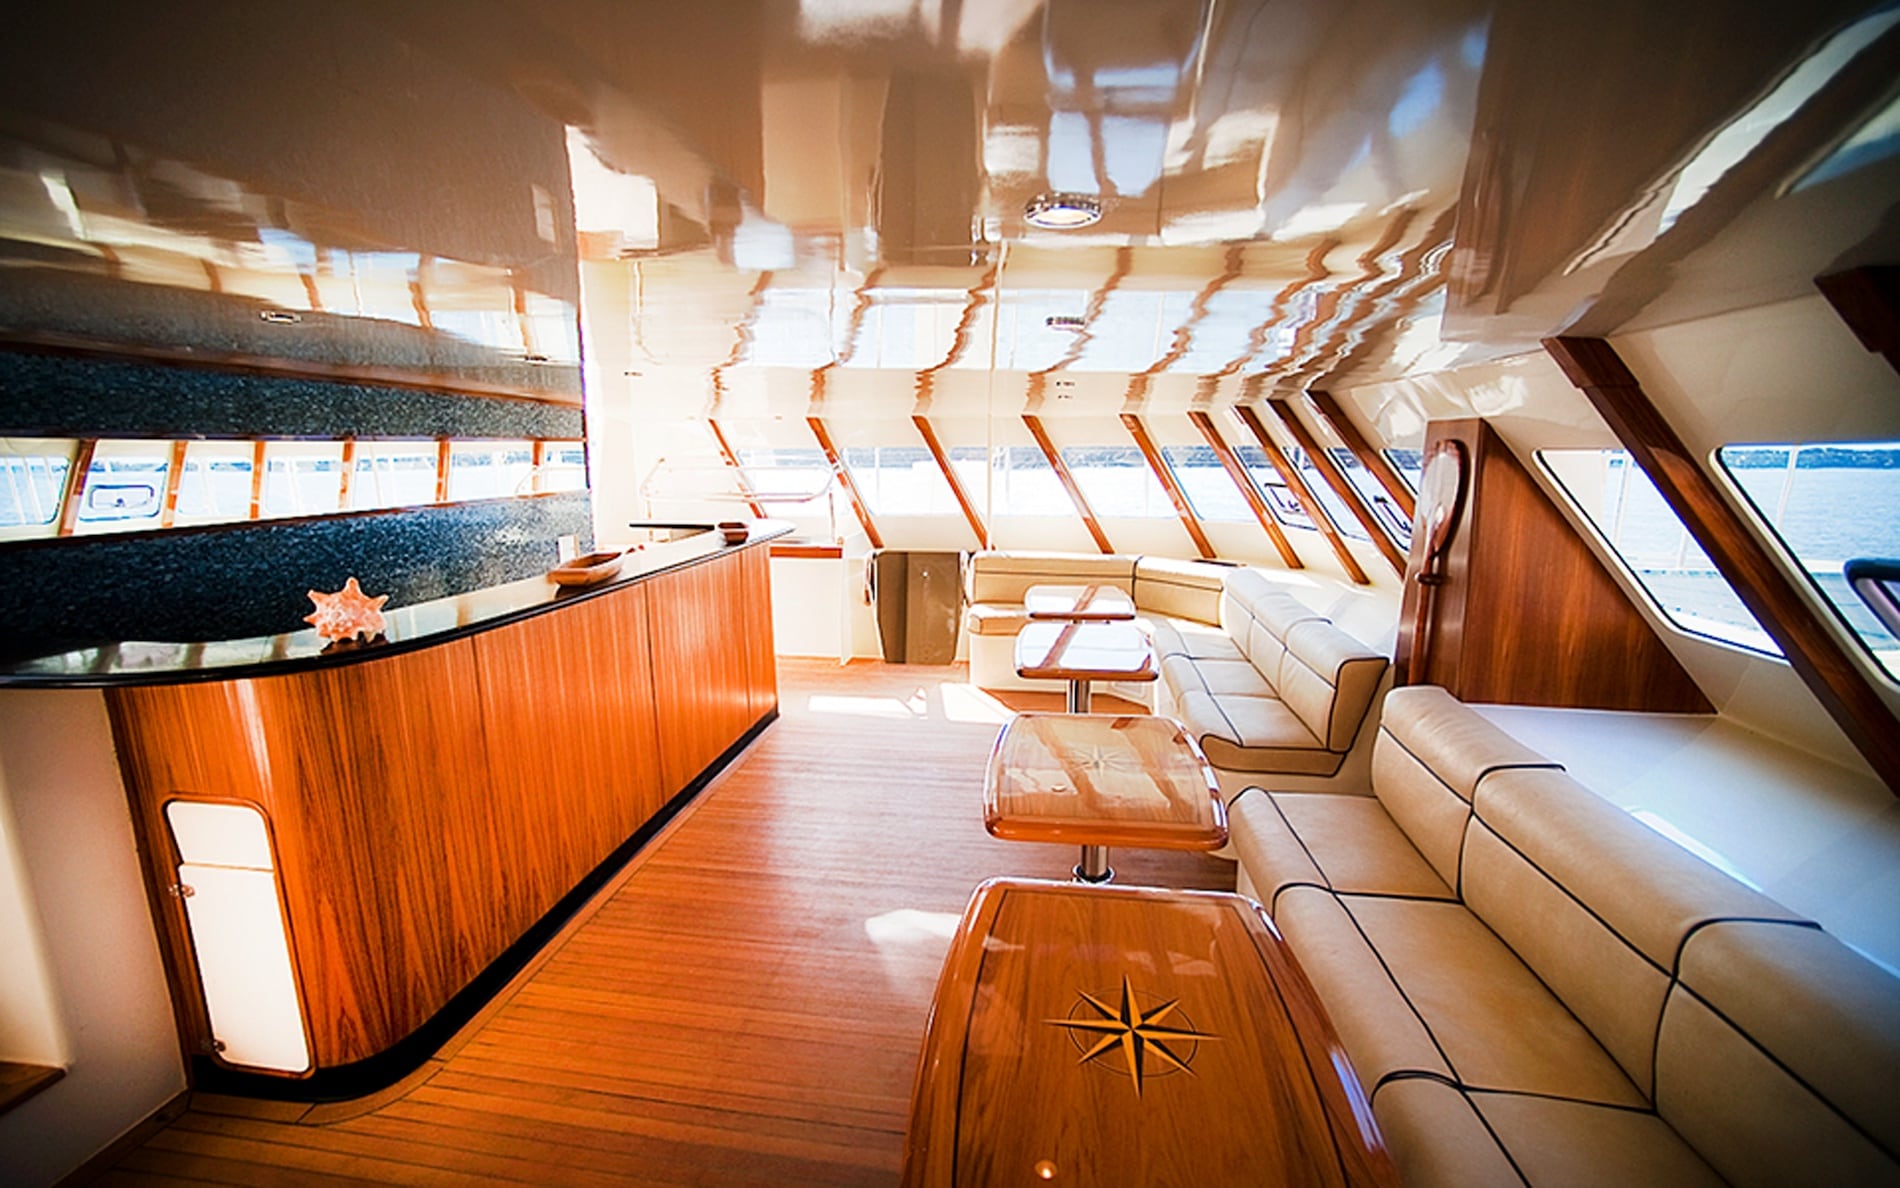 Elegant interior of Captain Andy's private charter yacht, featuring a spacious lounge with luxurious seating, wooden accents, and large windows offering panoramic ocean views